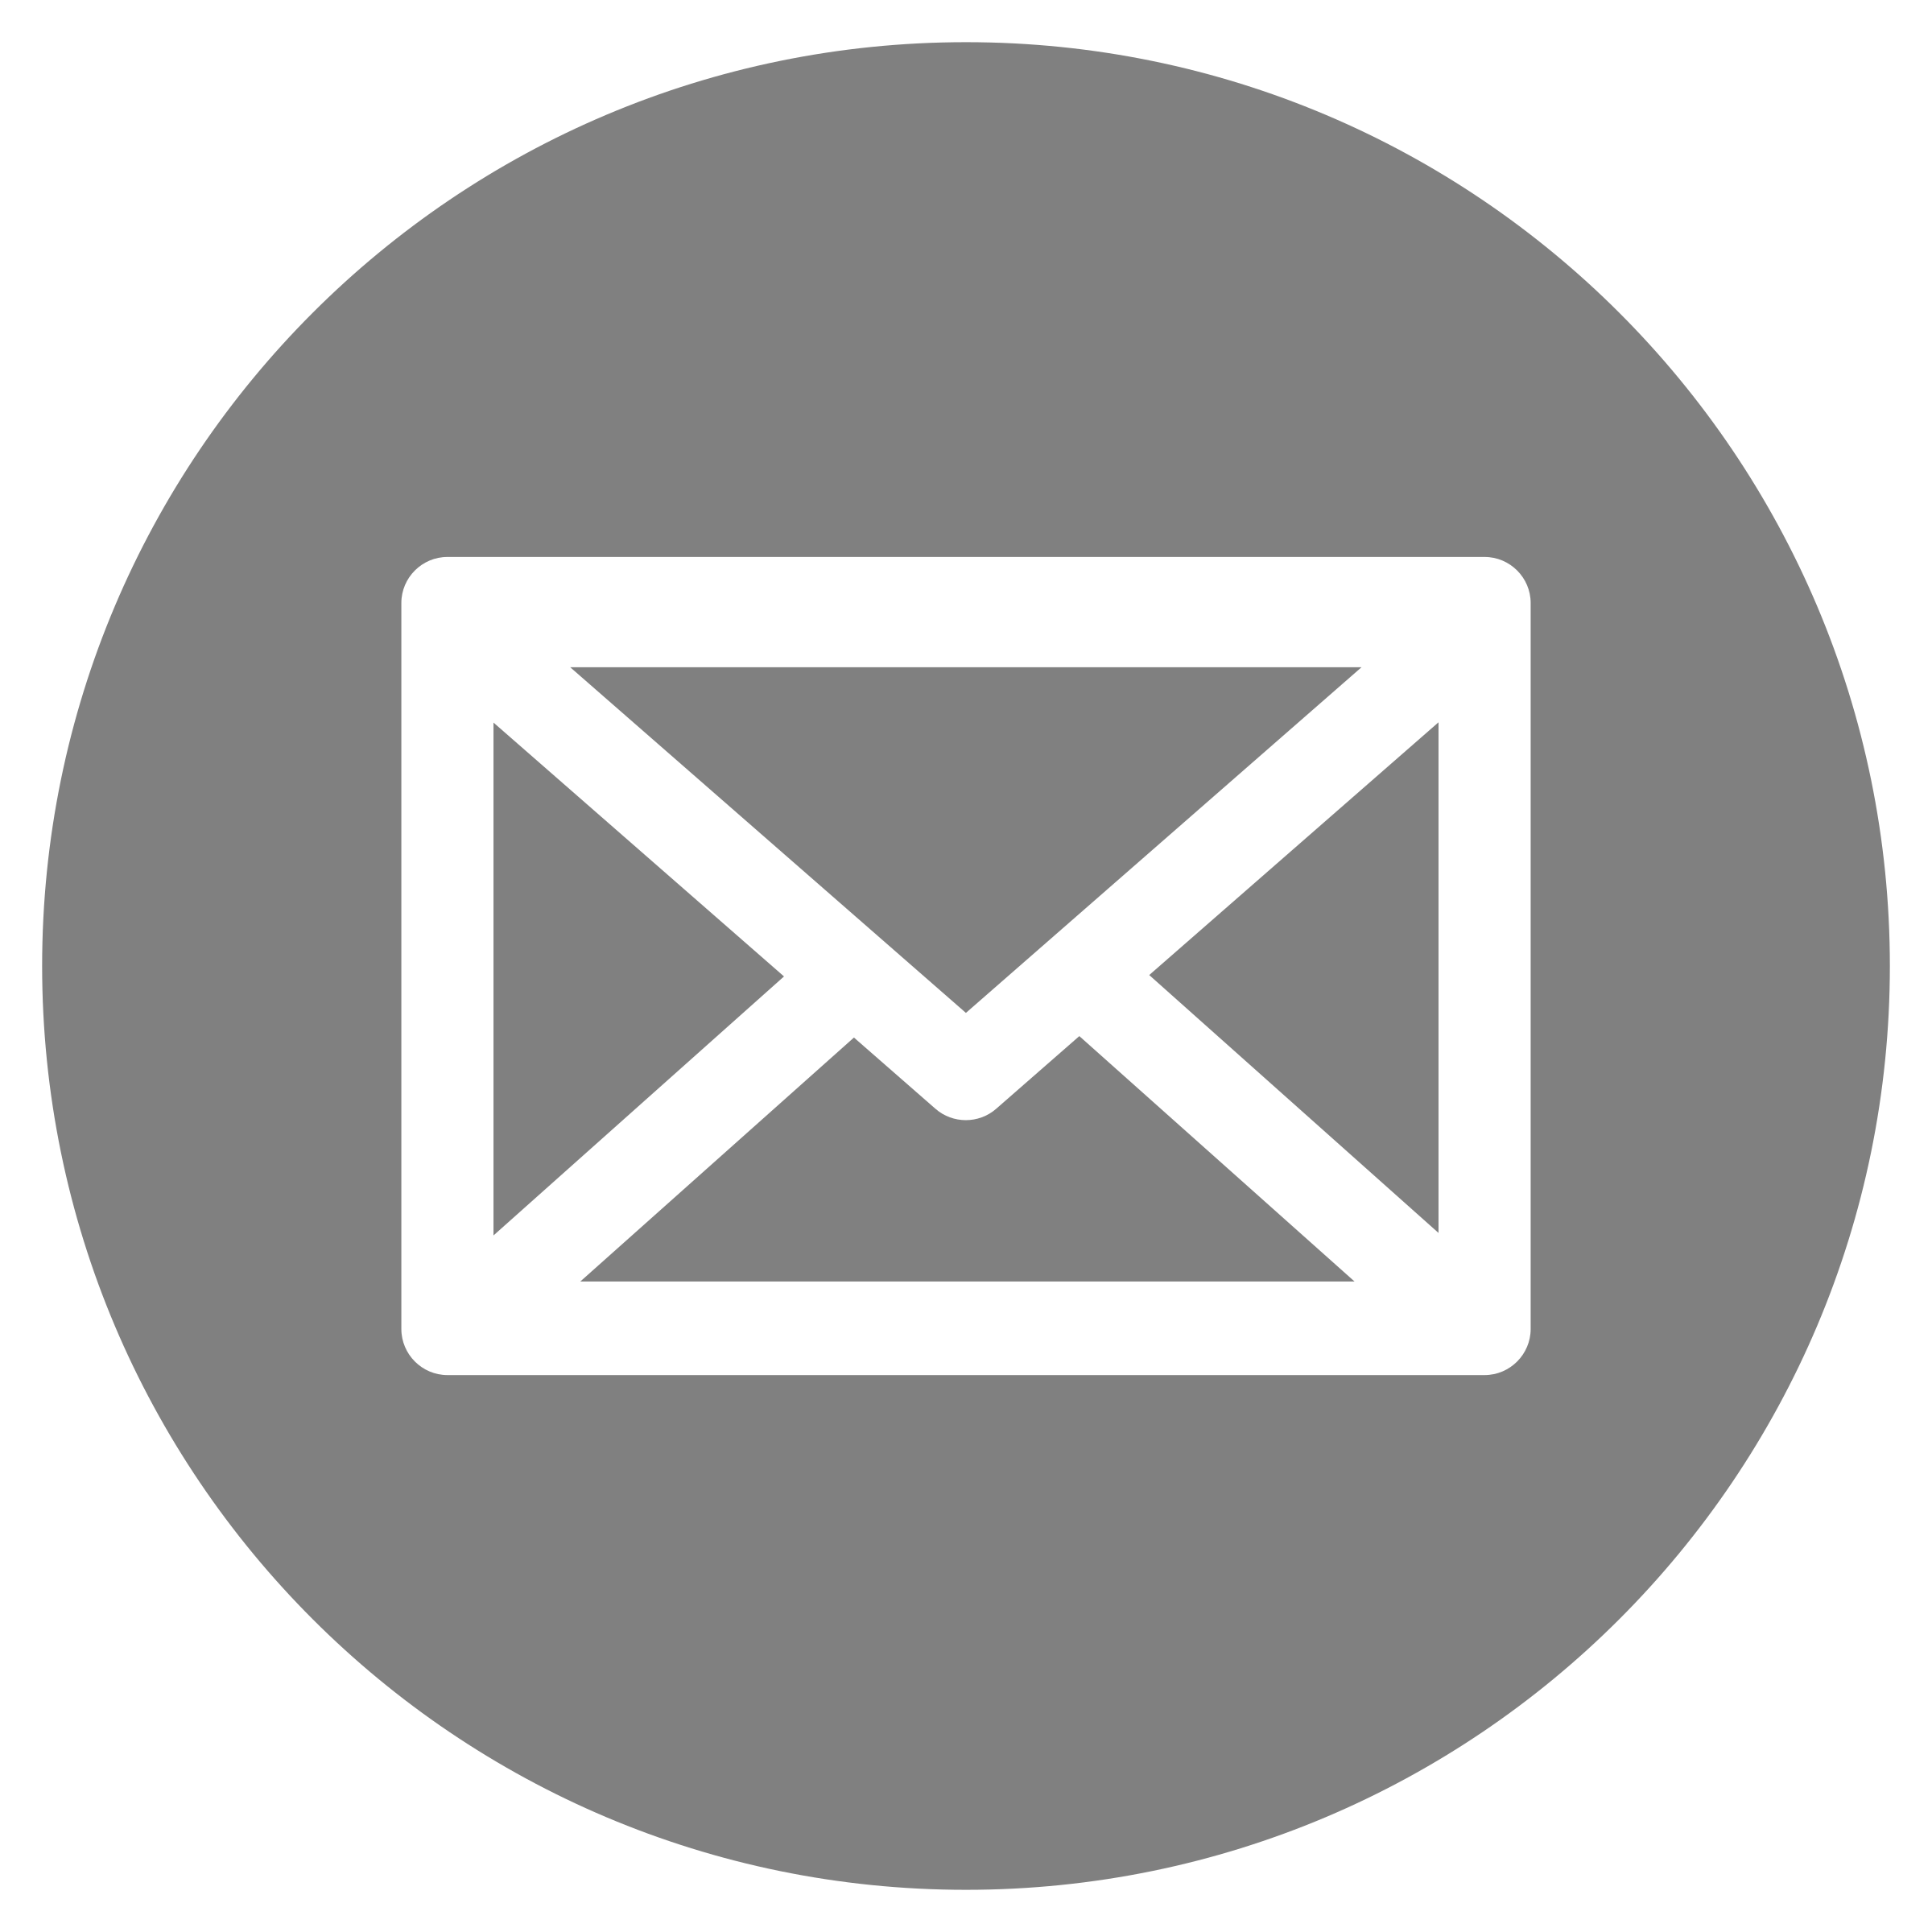 Email clipart certified mail. Icon white on grey